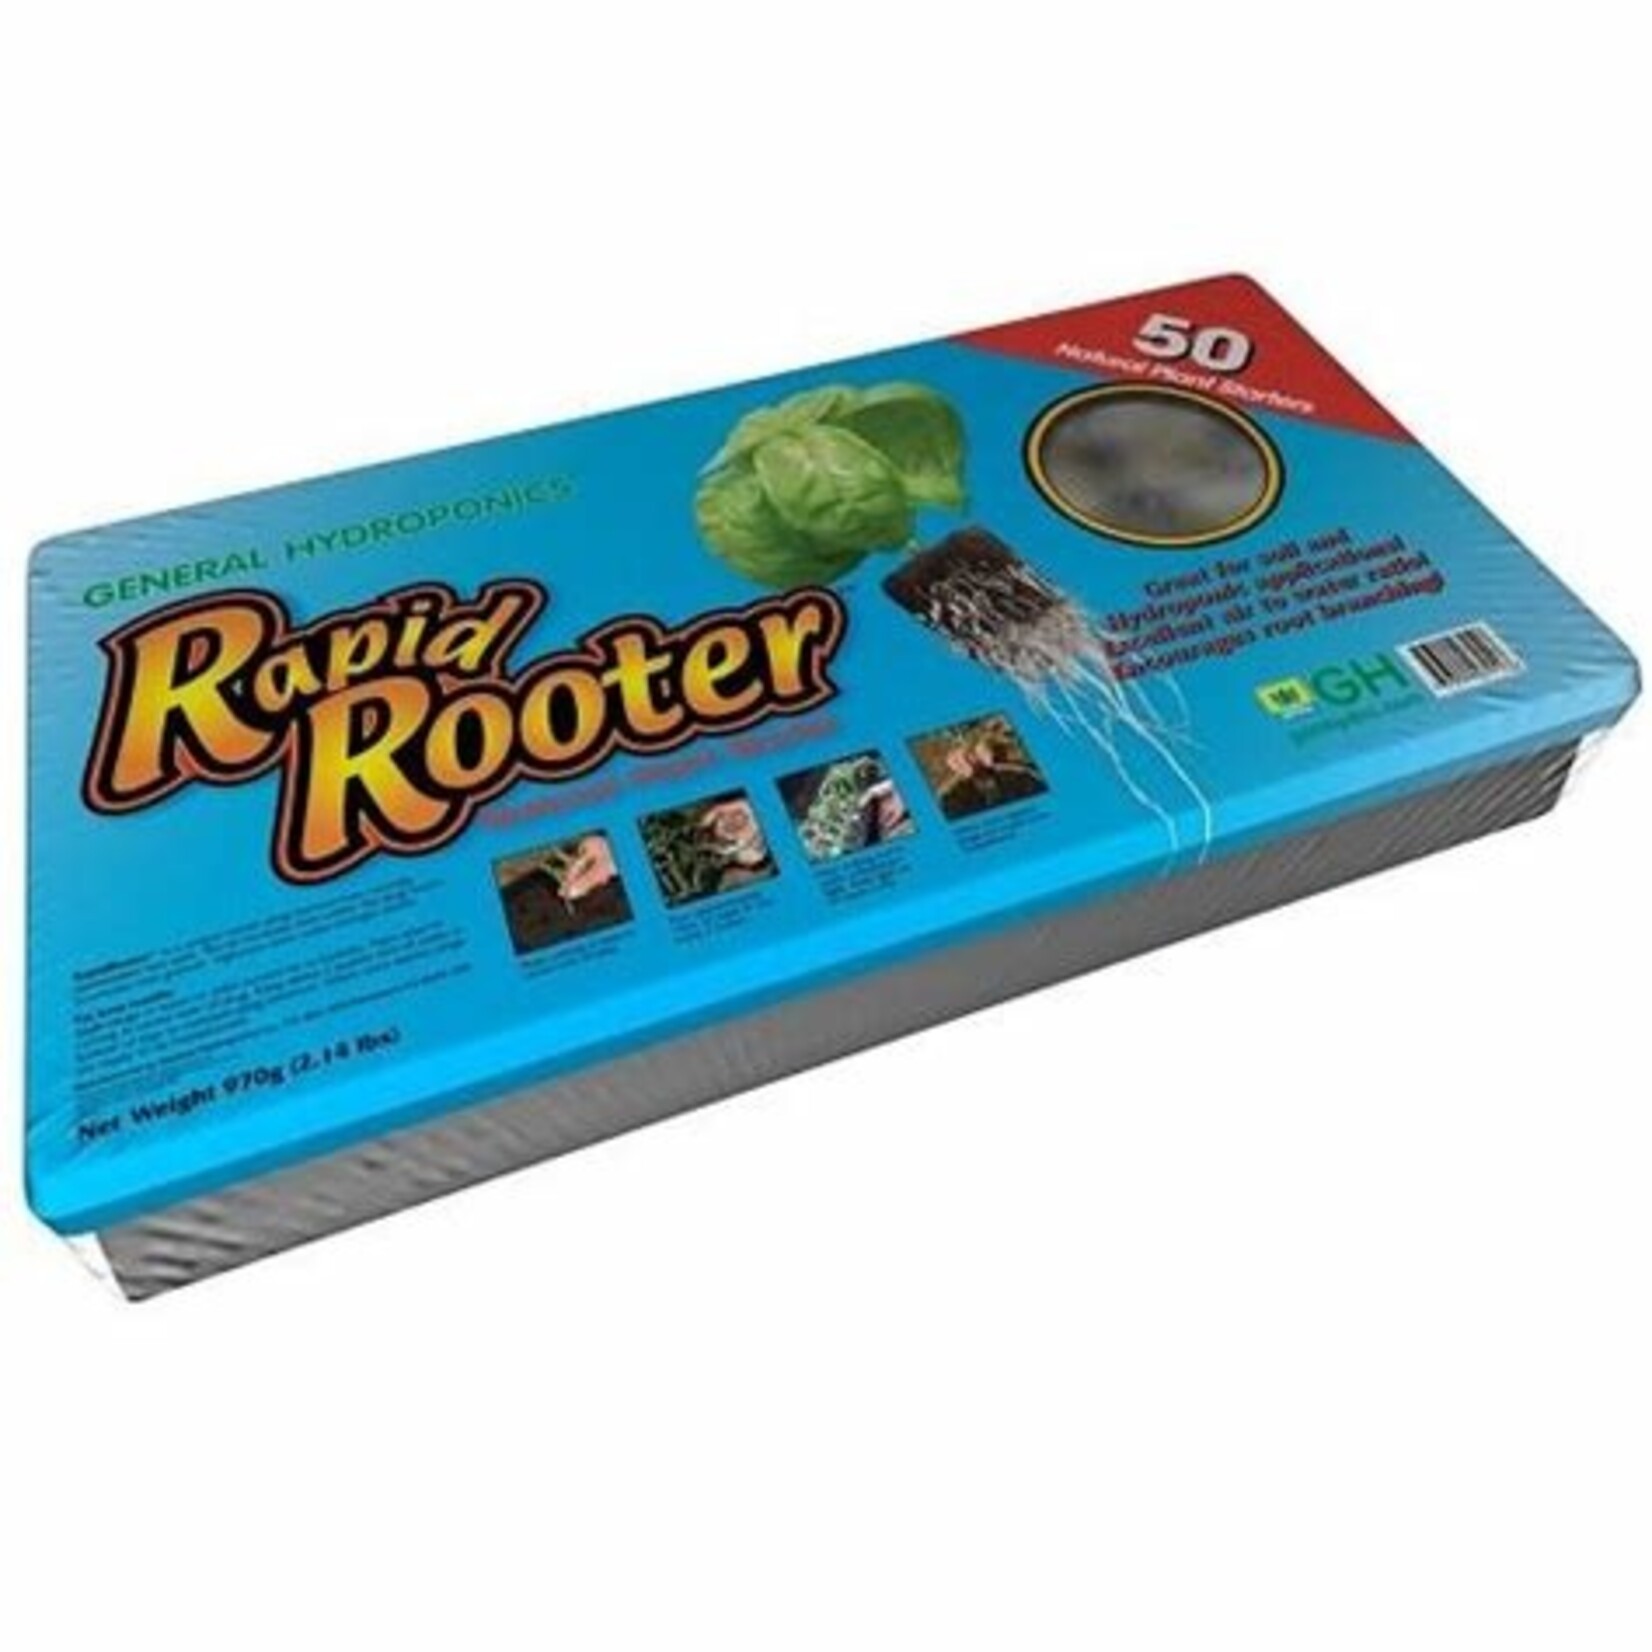 General Hydroponics Rapid Rooter Tray - 50 cell tray & plugs